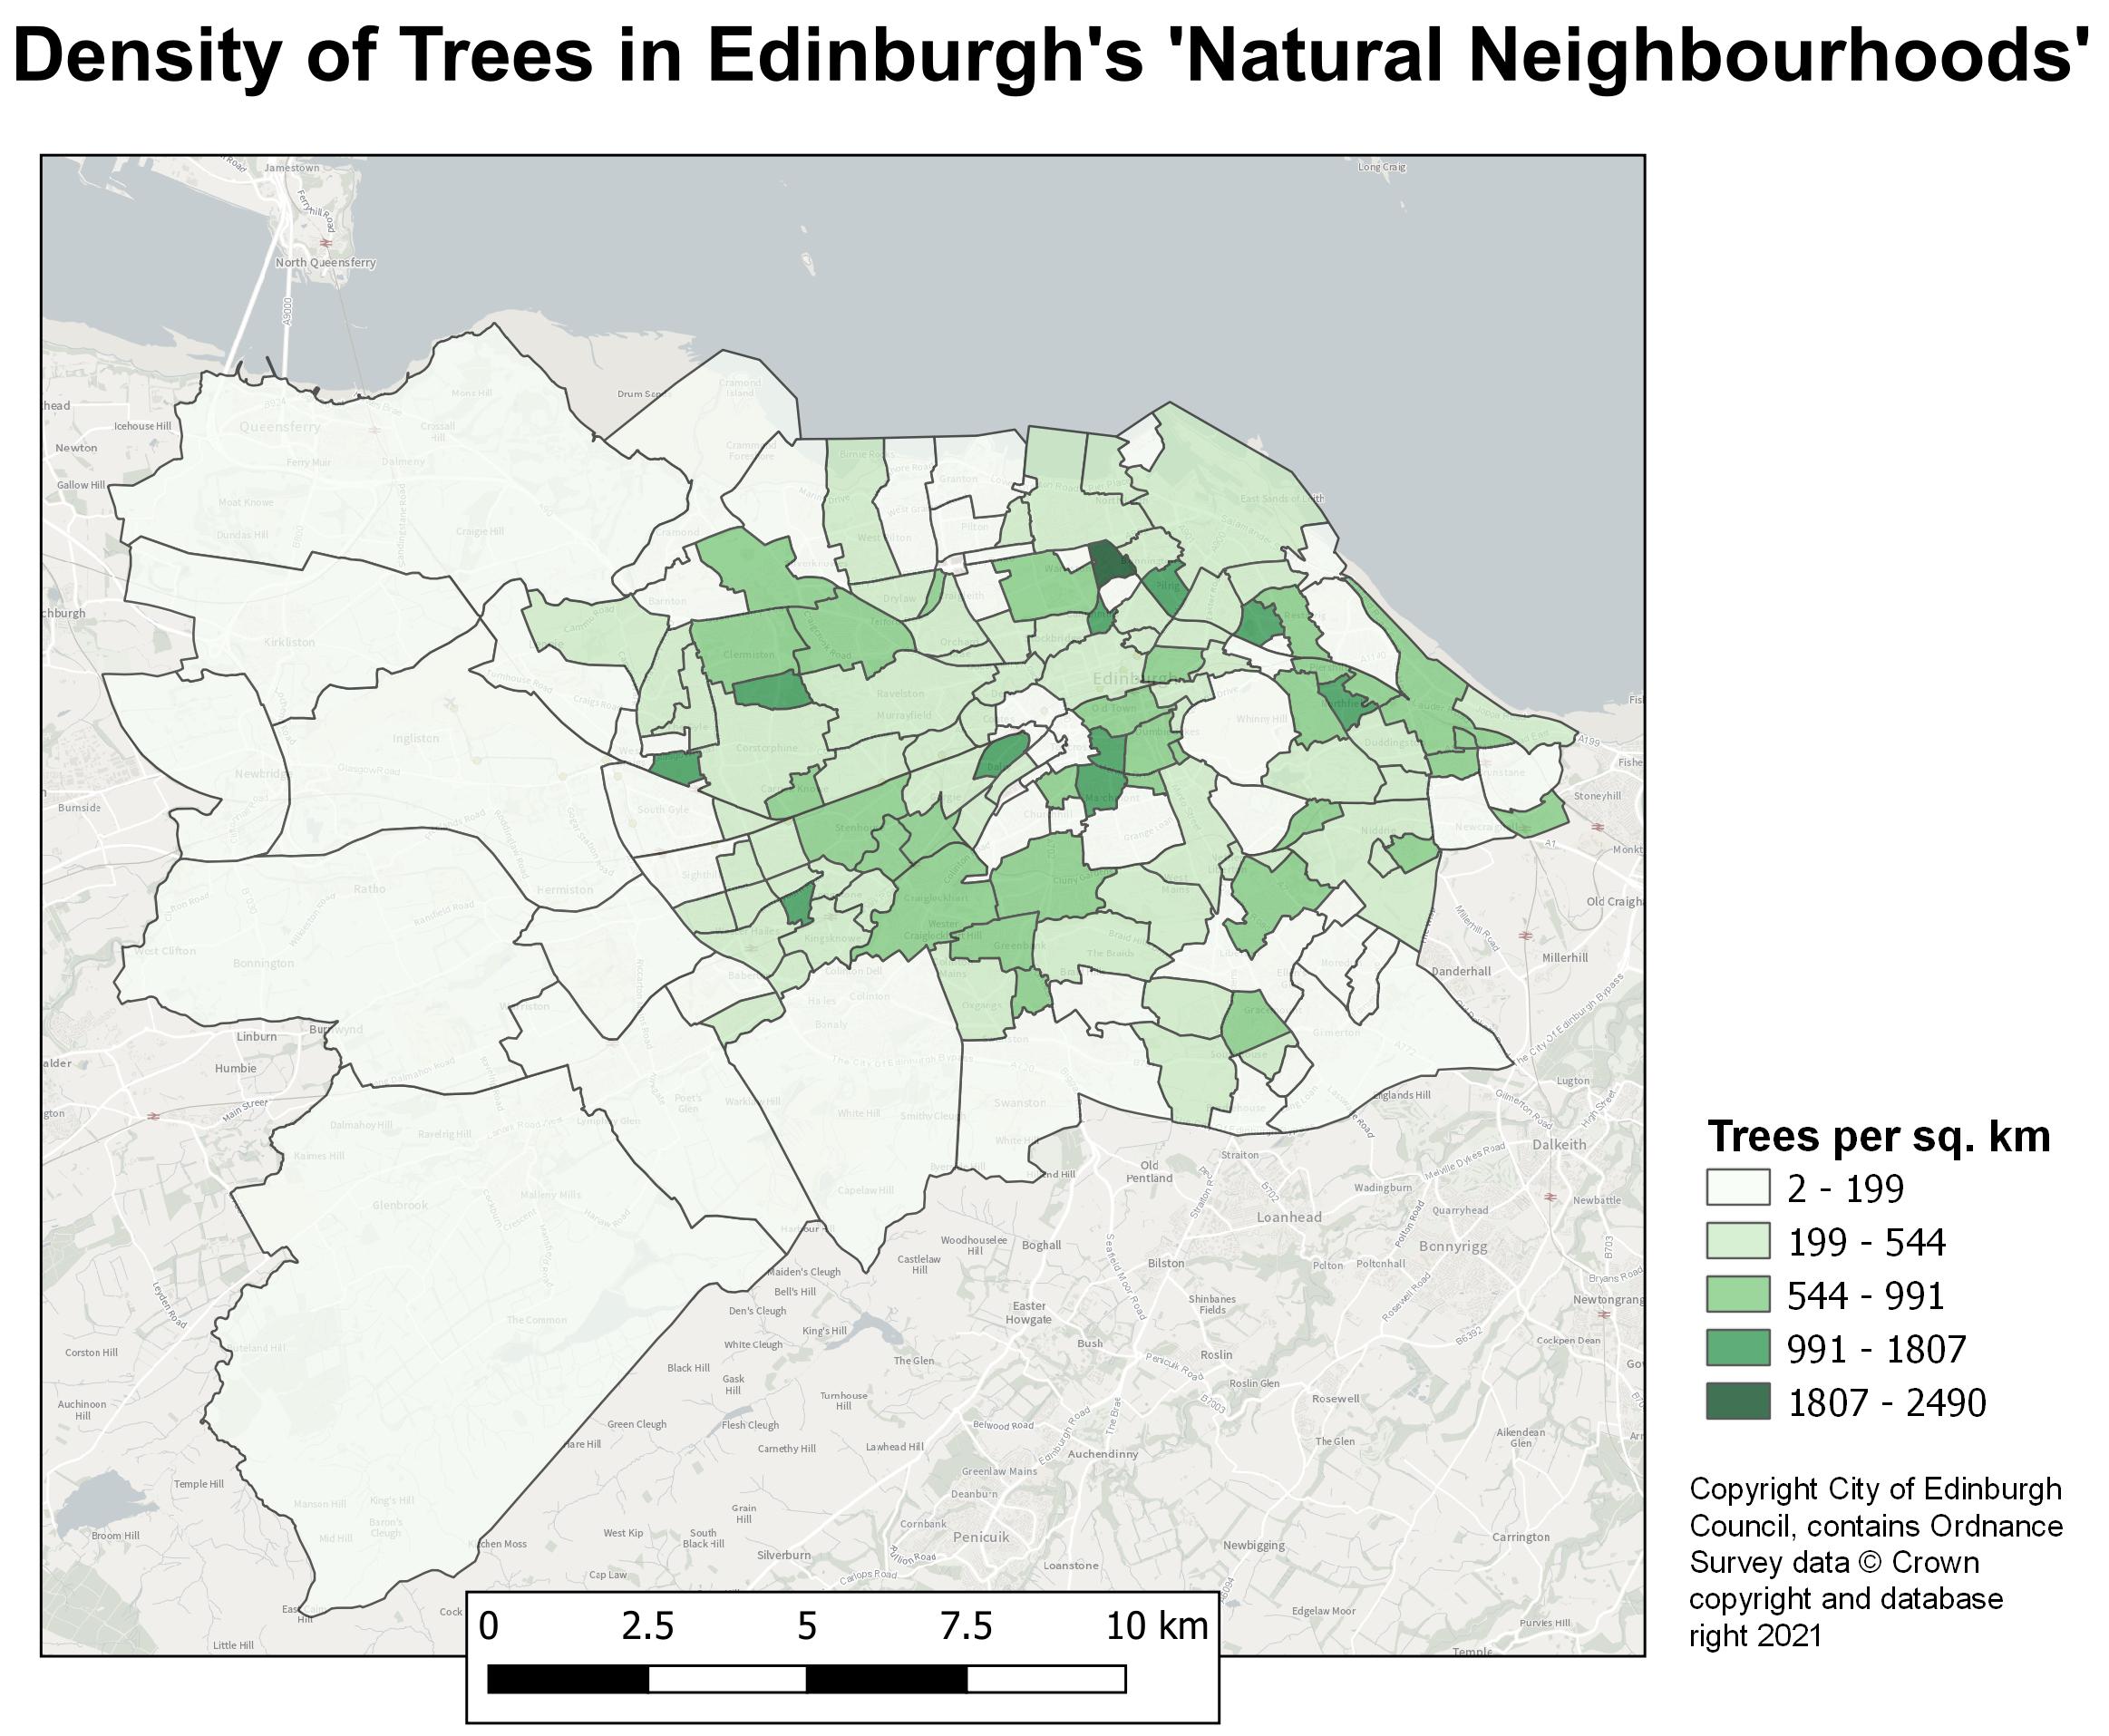 Final output map: Choropleth showing density of trees in Edinburgh Natural Neighbourhoods